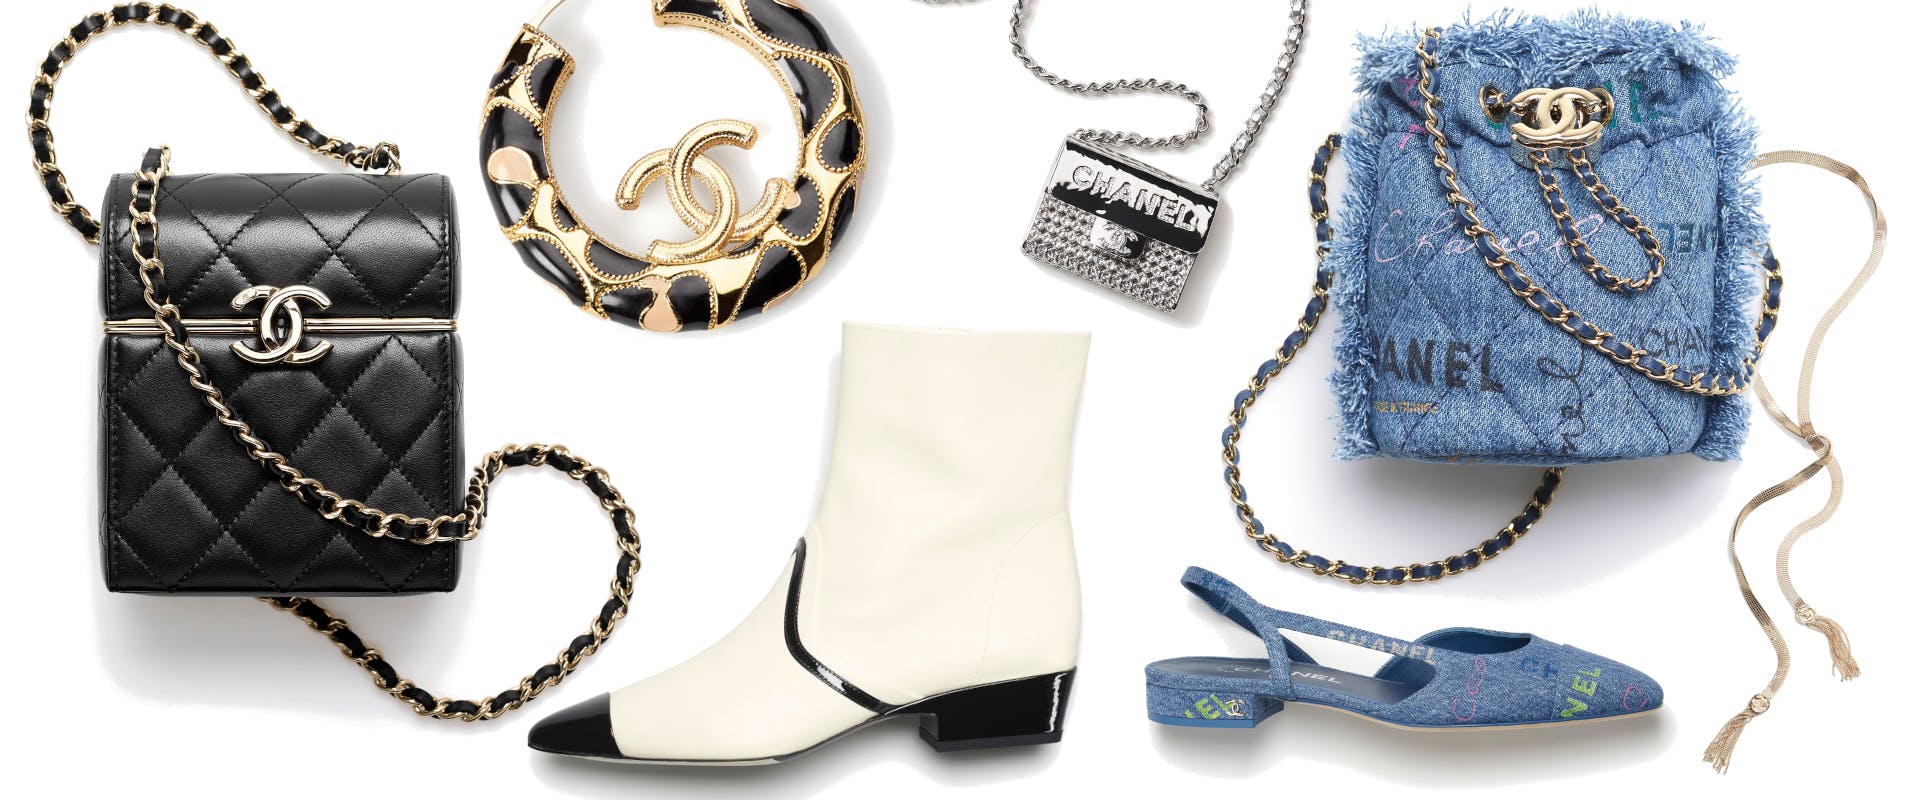 Accessories to choose from the CHANEL RTW SS 2022